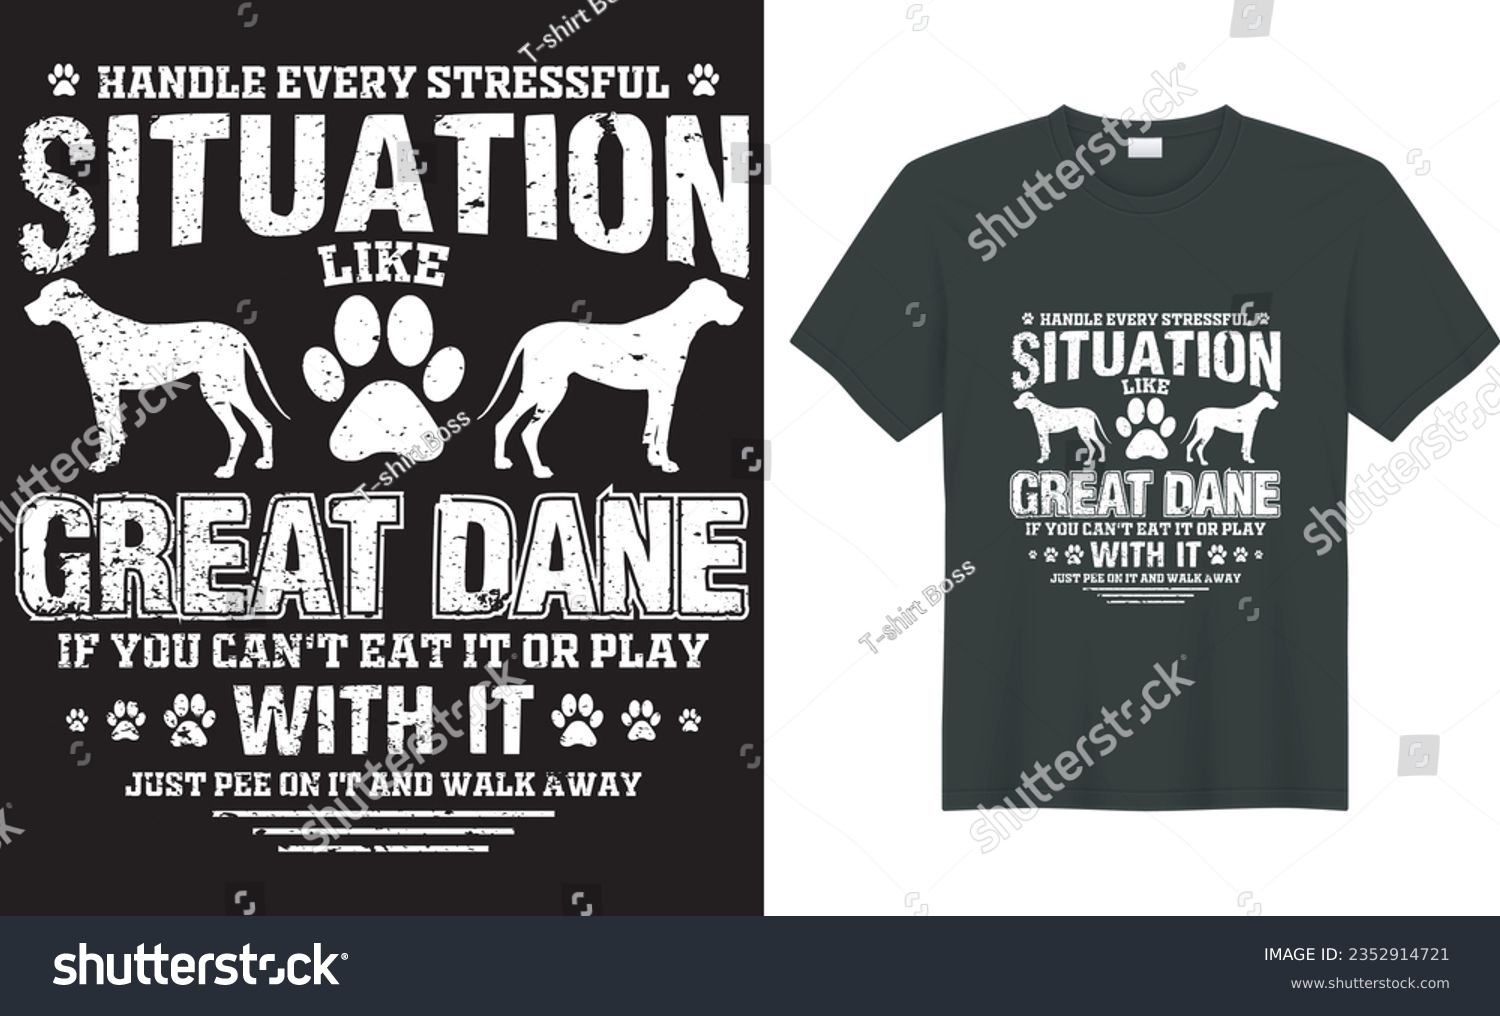 SVG of  Great Dane silhouette vintage and retro t-shirt design. Handle every stressful situation like great dane. perfect for print item dog t-shirt, coffee mug, poster, cards, pillow cover, sticker, Canvas  svg